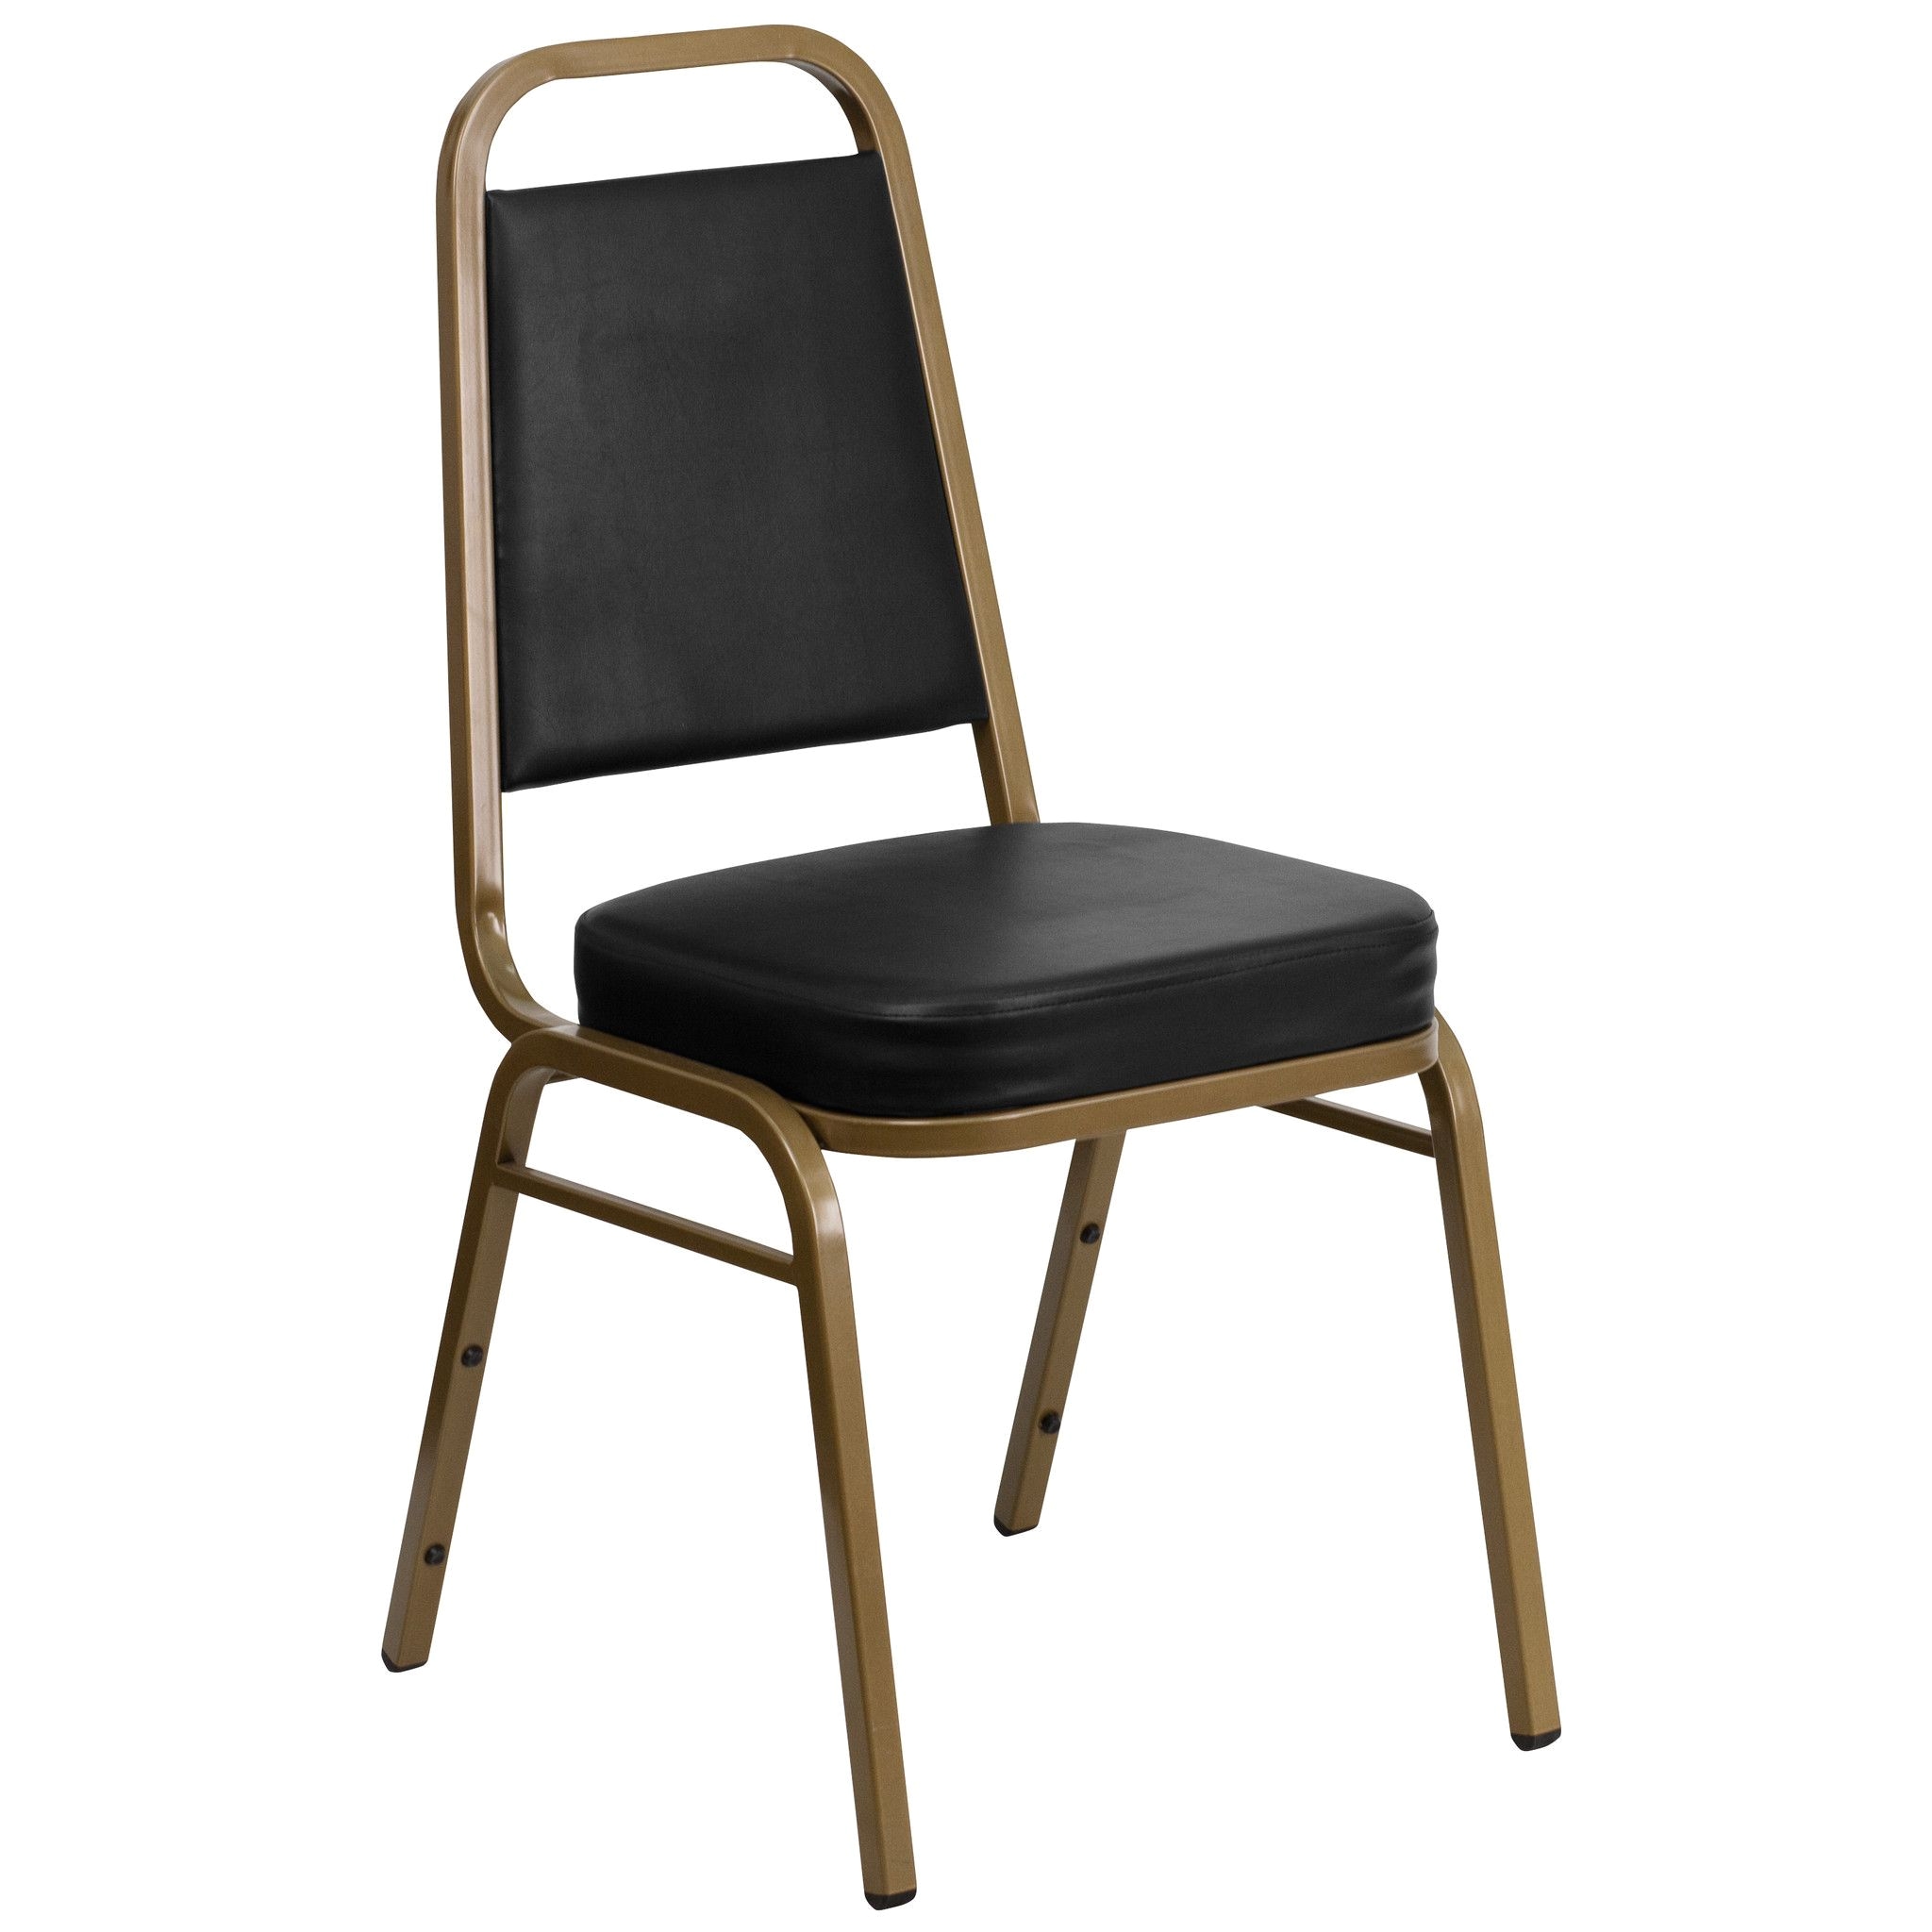 Stackable Church Chairs with Arms Buy Hercules Series Stacking Banquet Chair with Gold Frame at Harvey